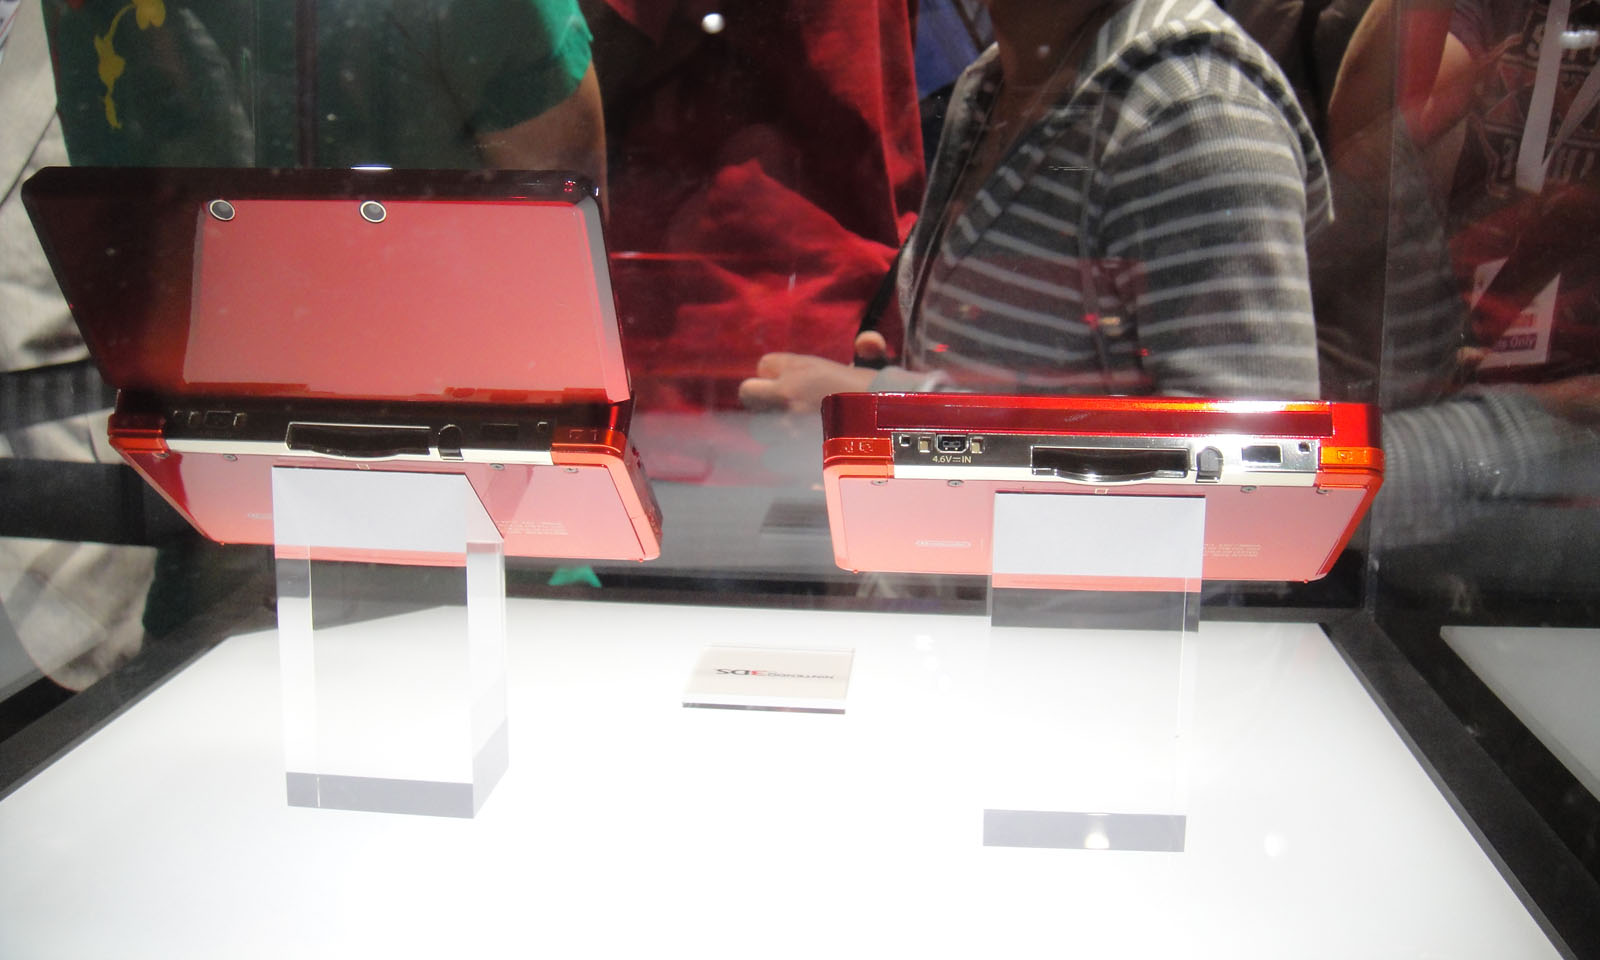 File:Nintendo 3DS display case at E3 2010 (rear angle).jpg 